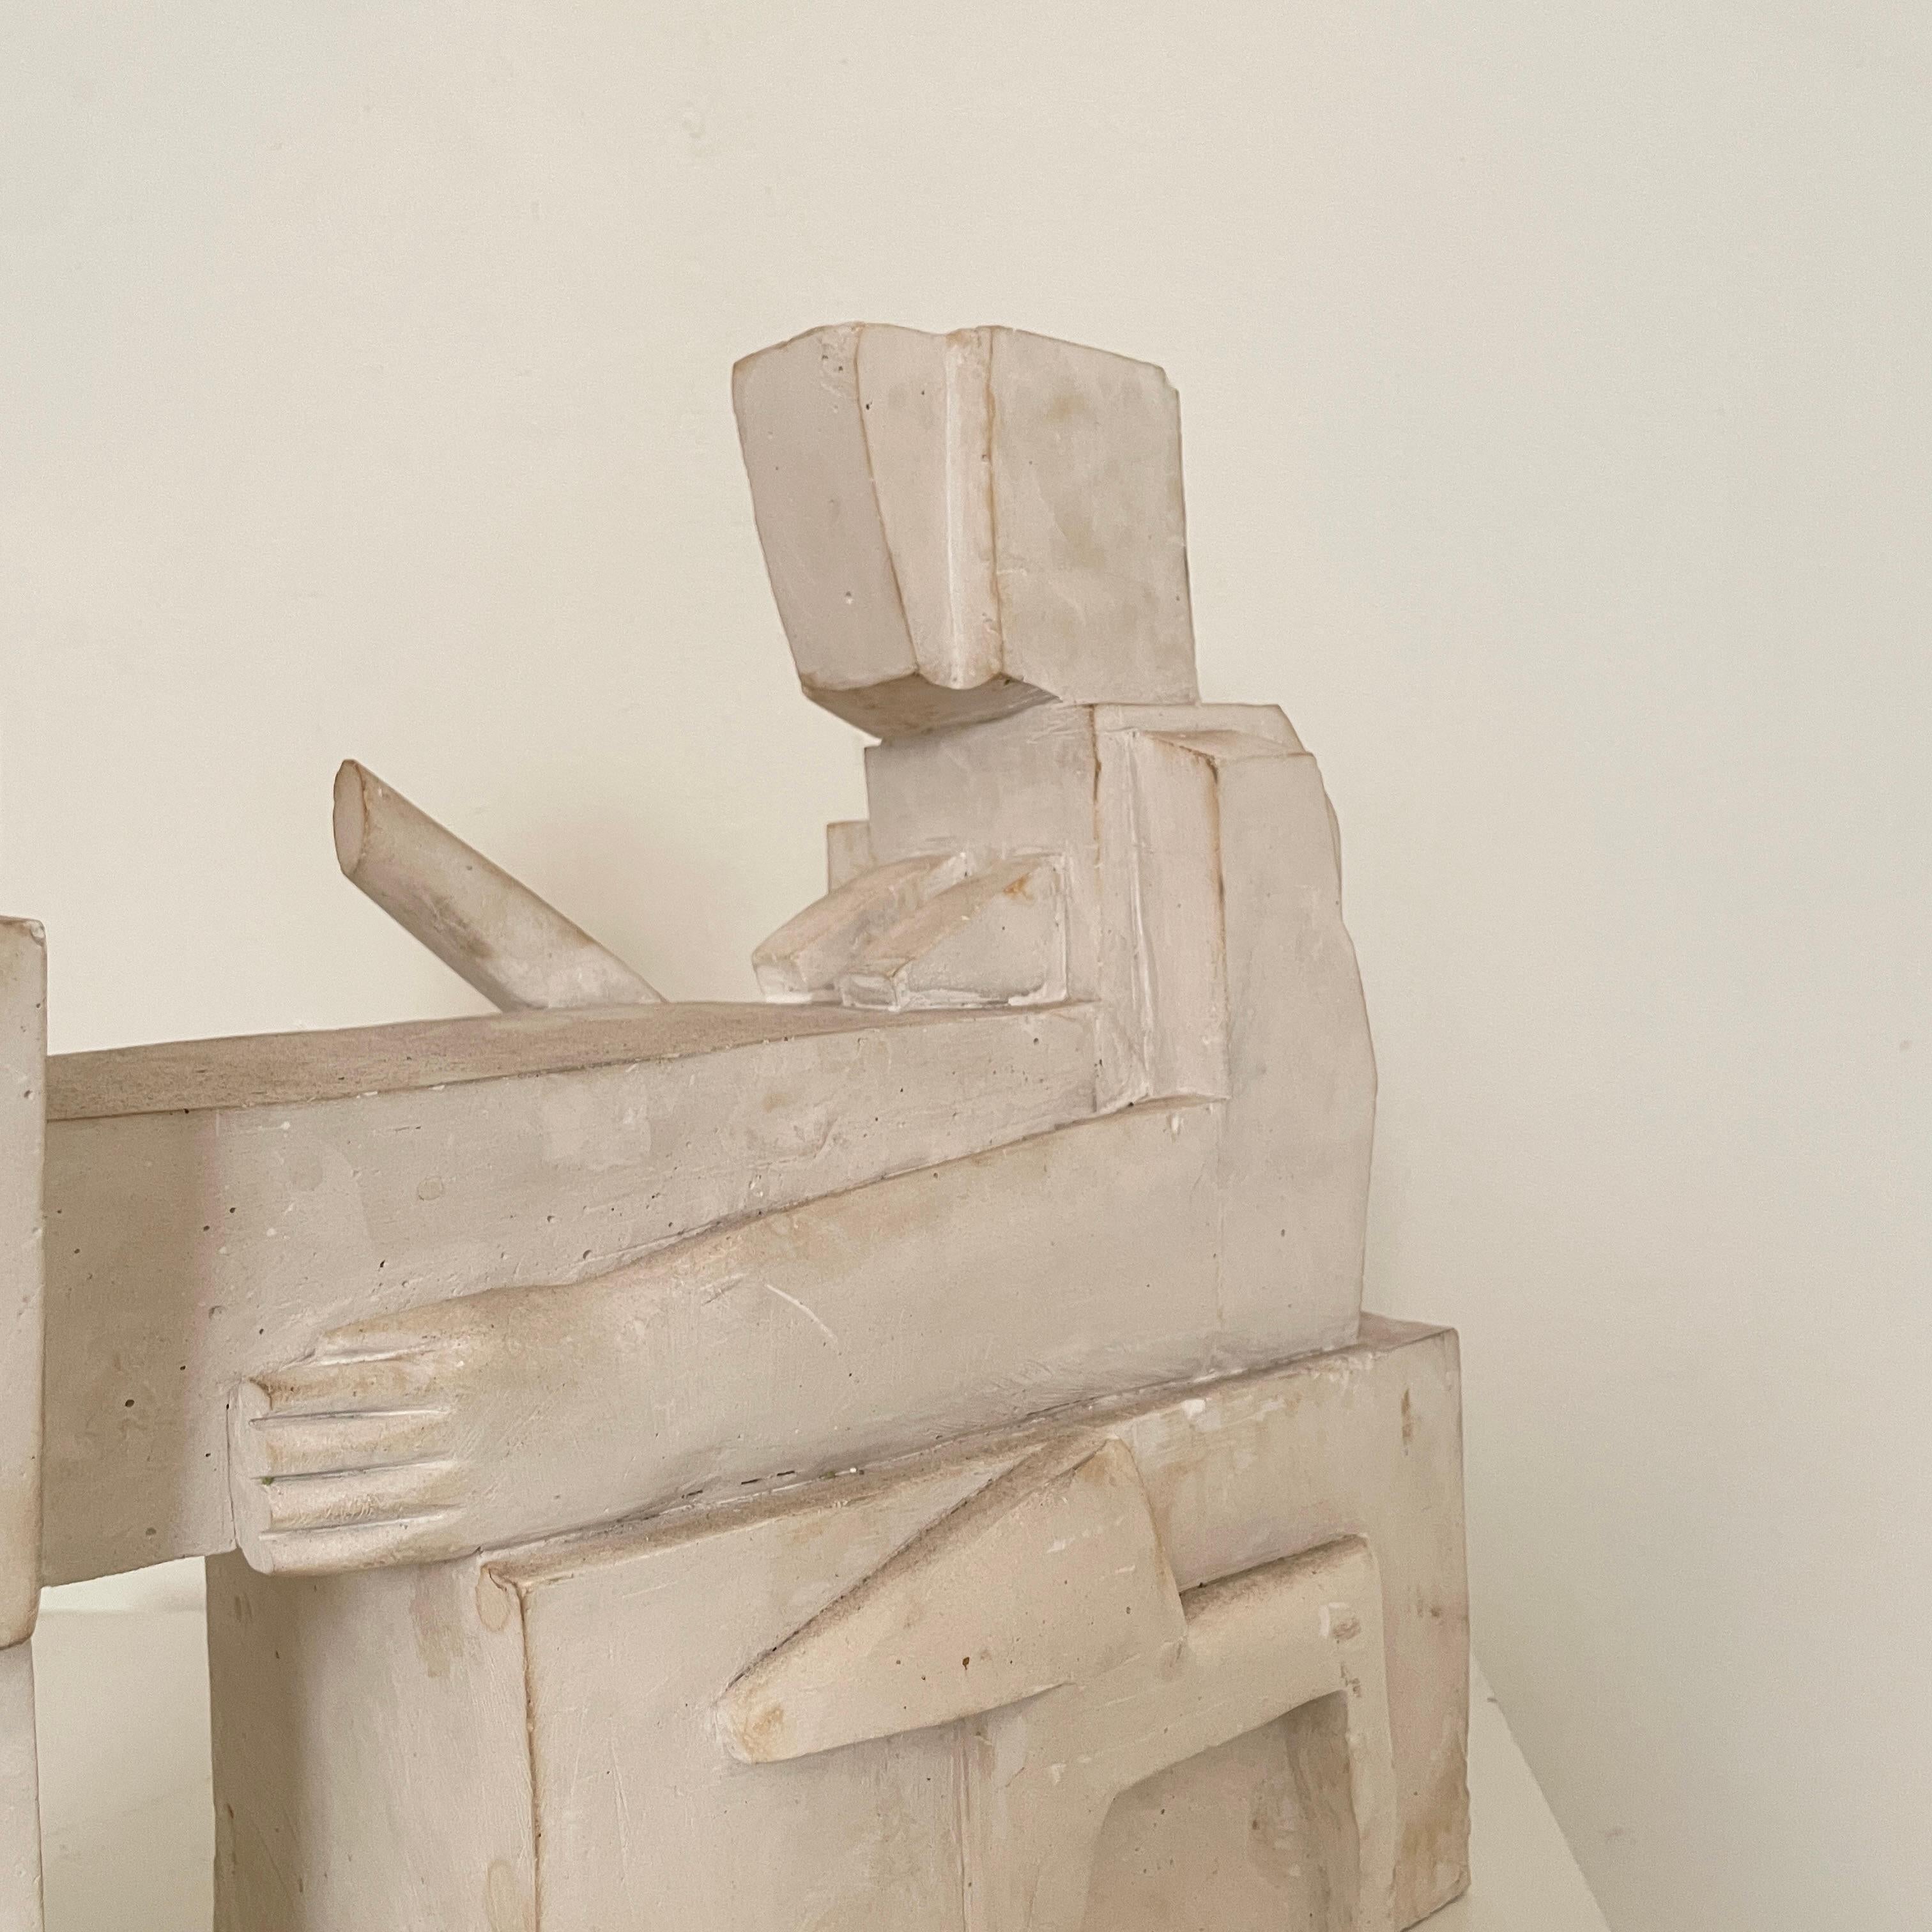 German 20th Century Cubist Sculpture Made Out of White Plaster from the, 1960s